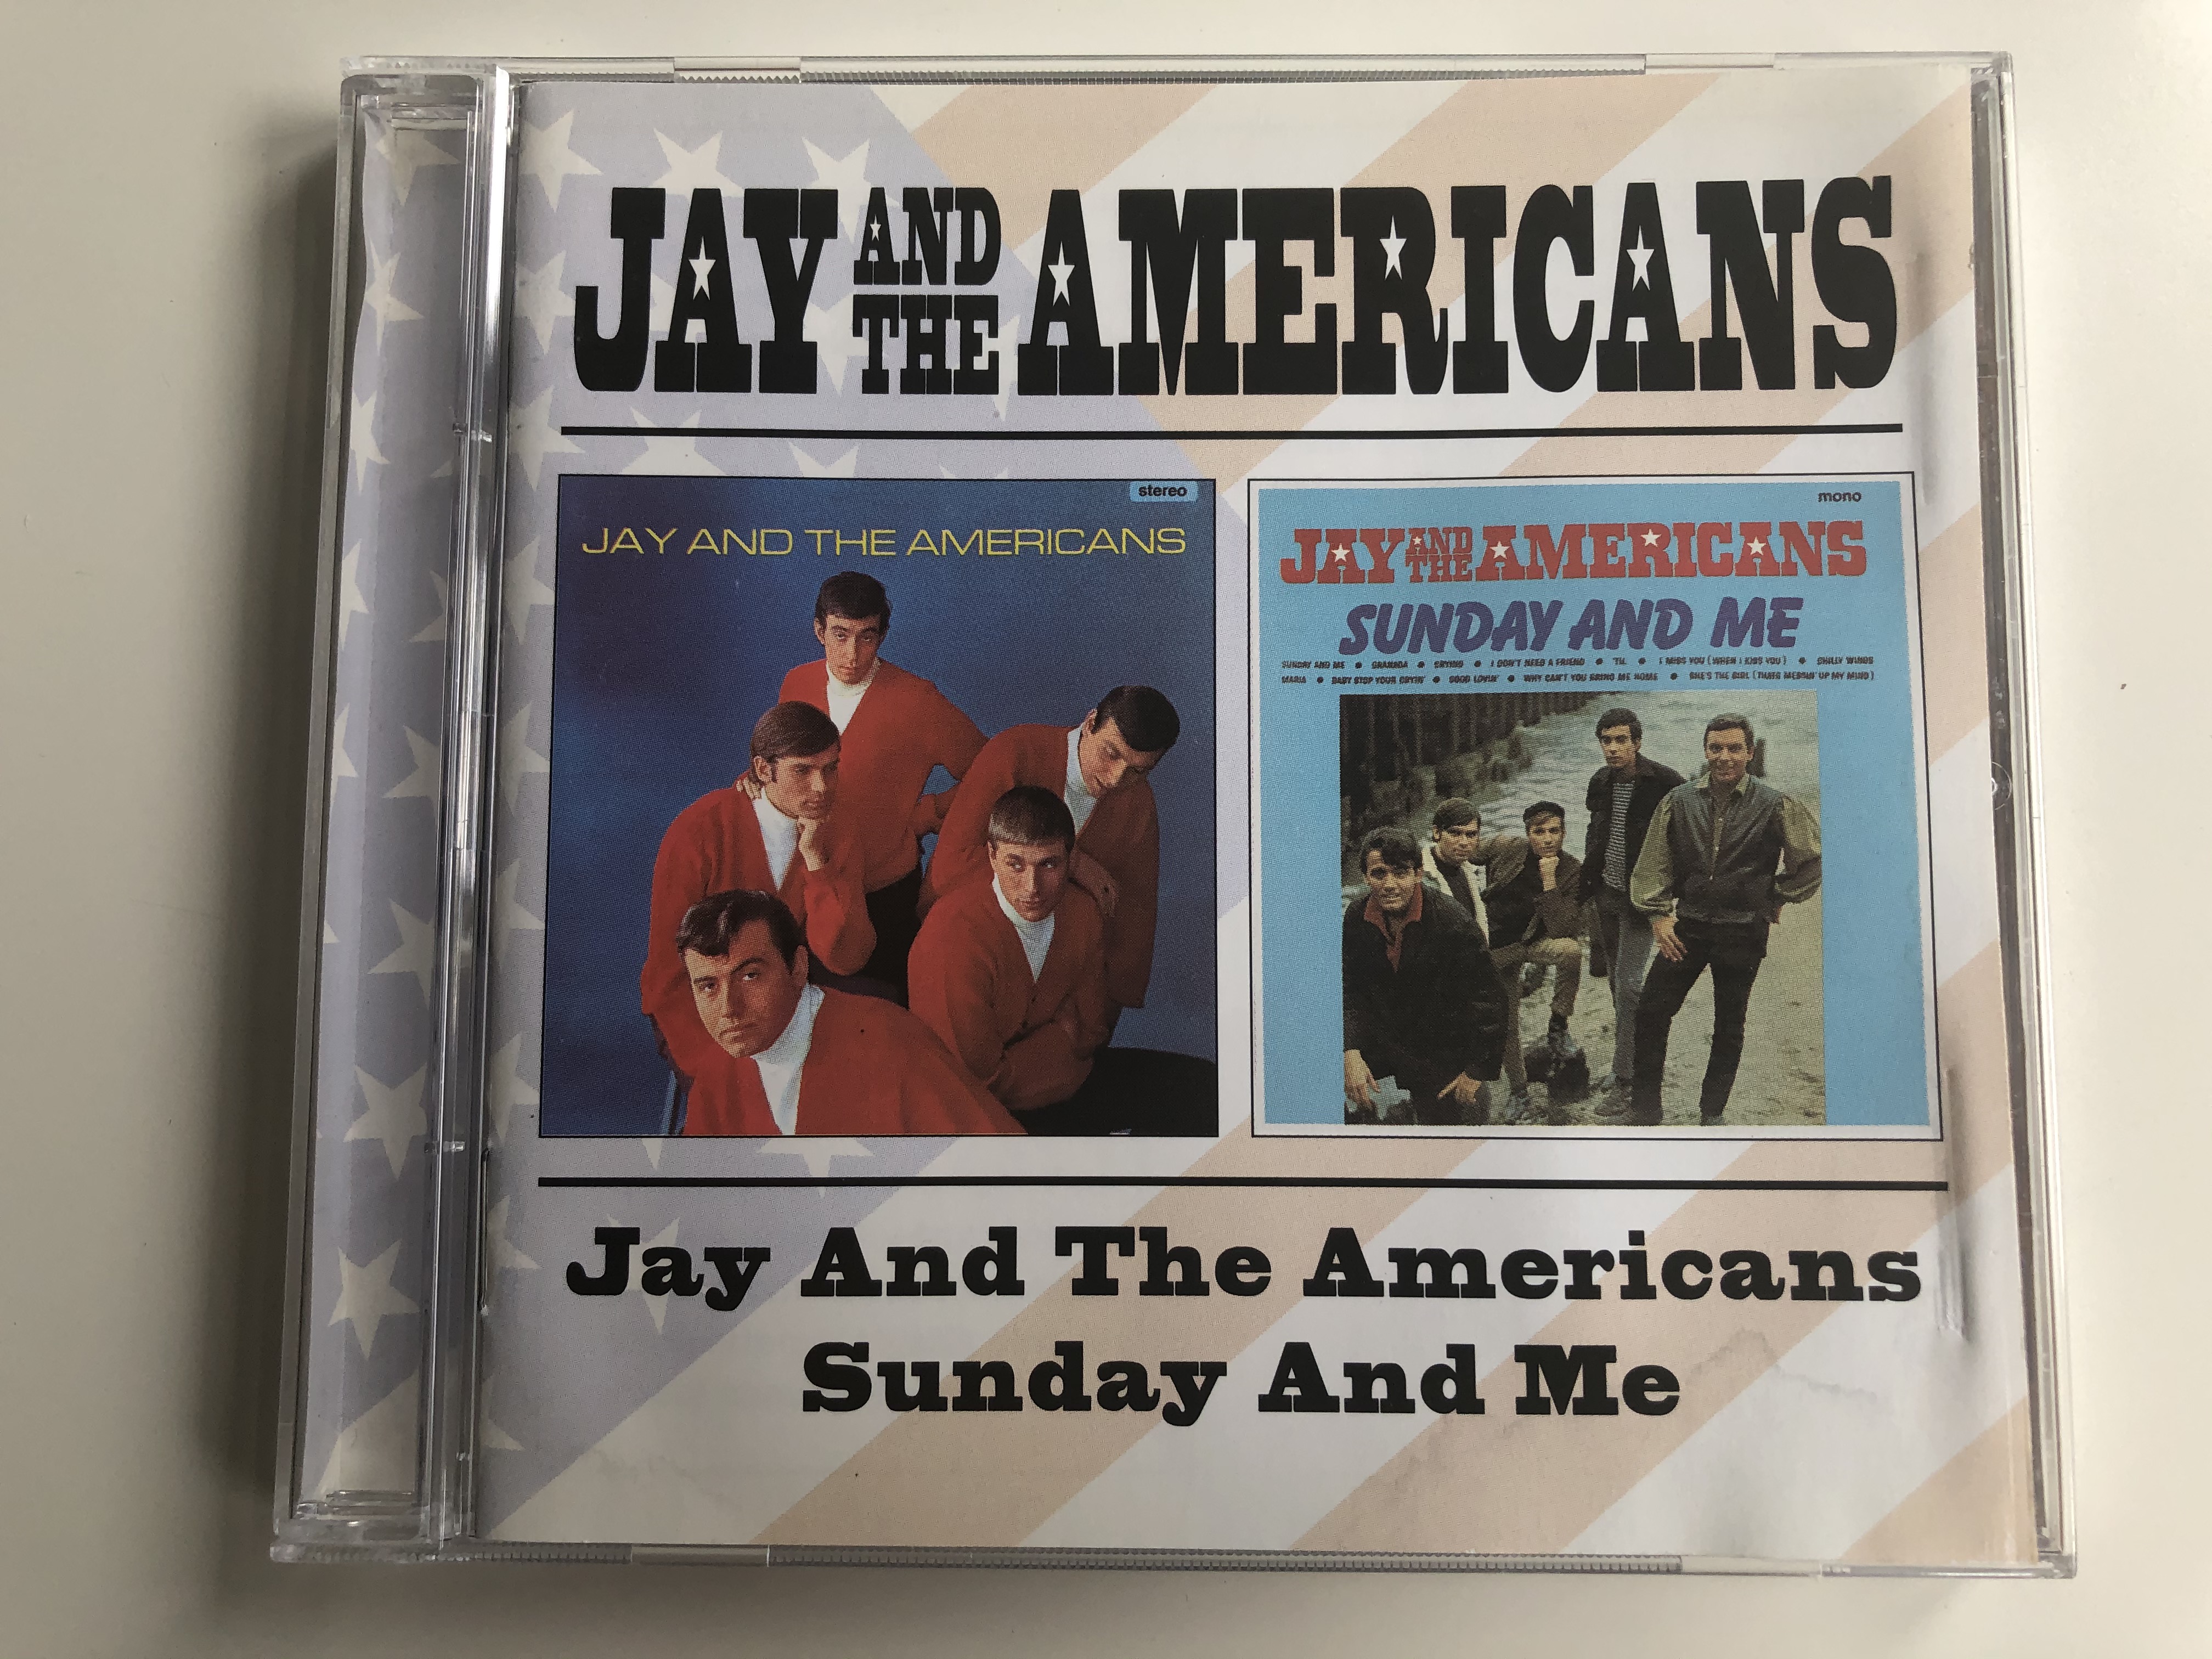 jay-and-the-americans-jay-the-americans-sunday-and-me-bgo-records-audio-cd-2001-bgocd524-1-.jpg